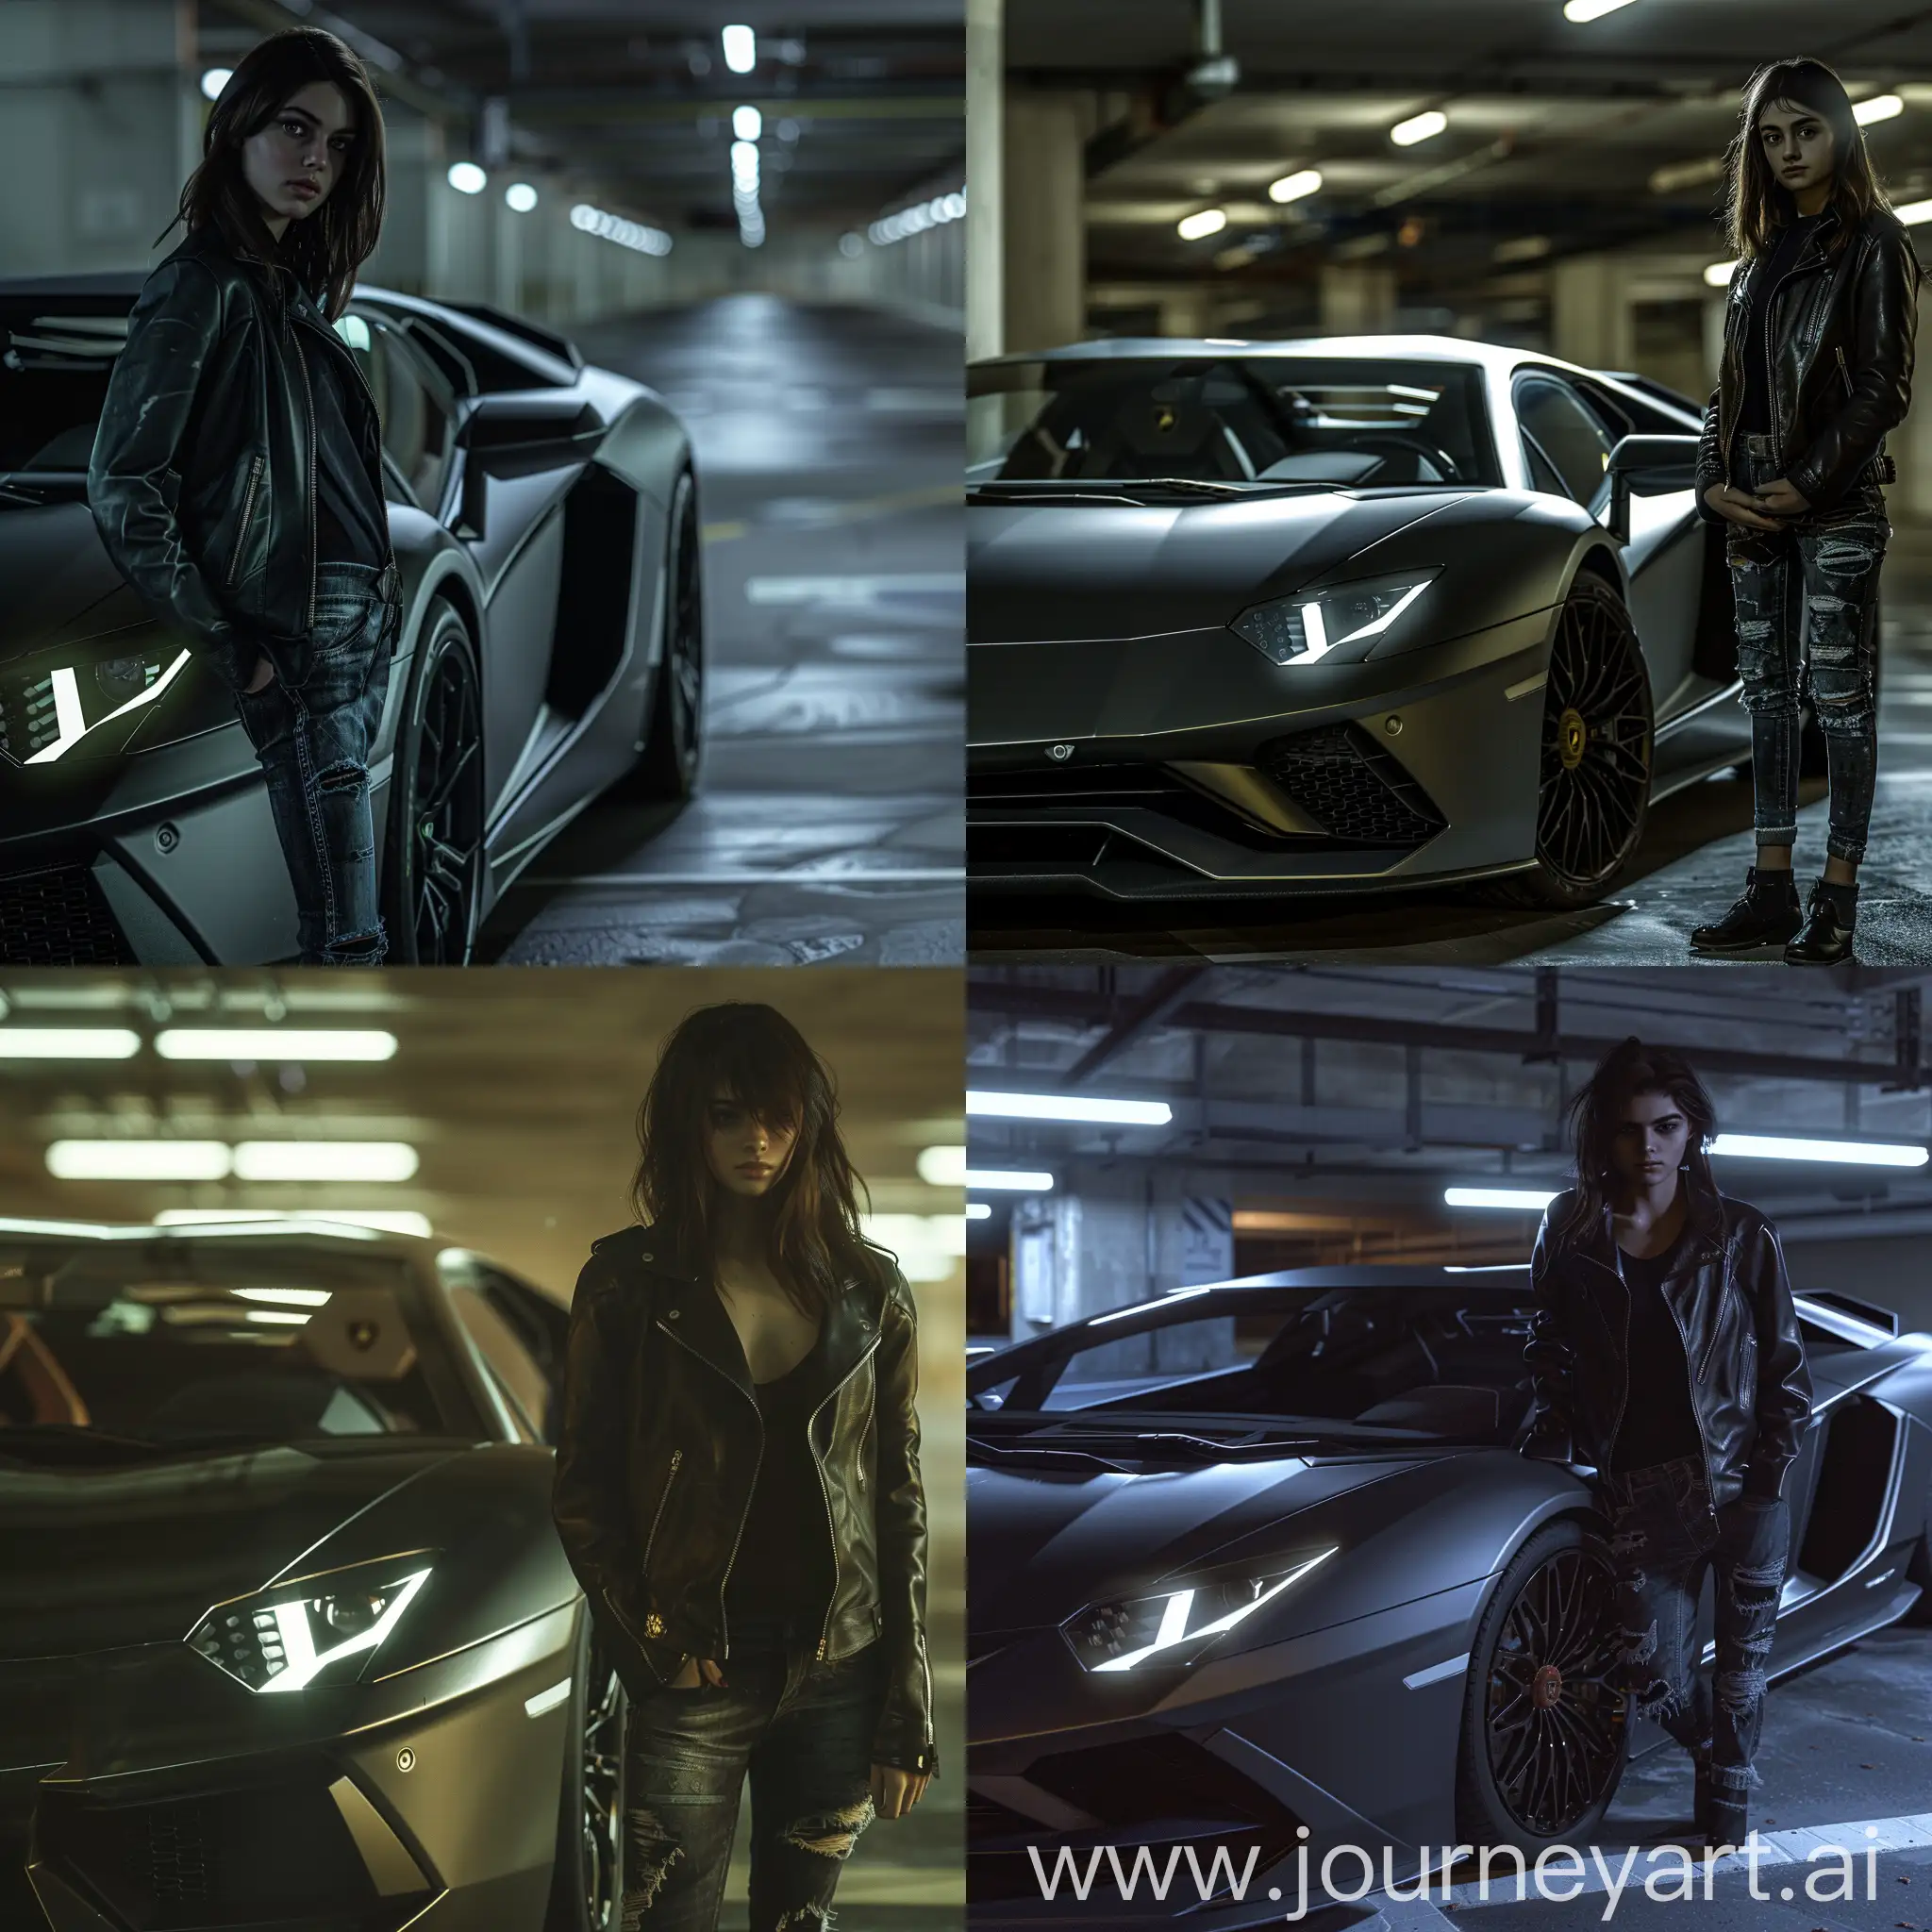 A sophisticated, realistic 4k cinematic photo, teenager, Not a mature 17 years old. European appearance with classical darkbrown, brunette, medium length, in style Fringe hairy .wearing a stylish black leather jacket and distressed jeans, standing confidently next to a sleek, black Lamborghini Aventador in a dimly lit underground parking garage, with the car's LED headlights illuminating the scene."